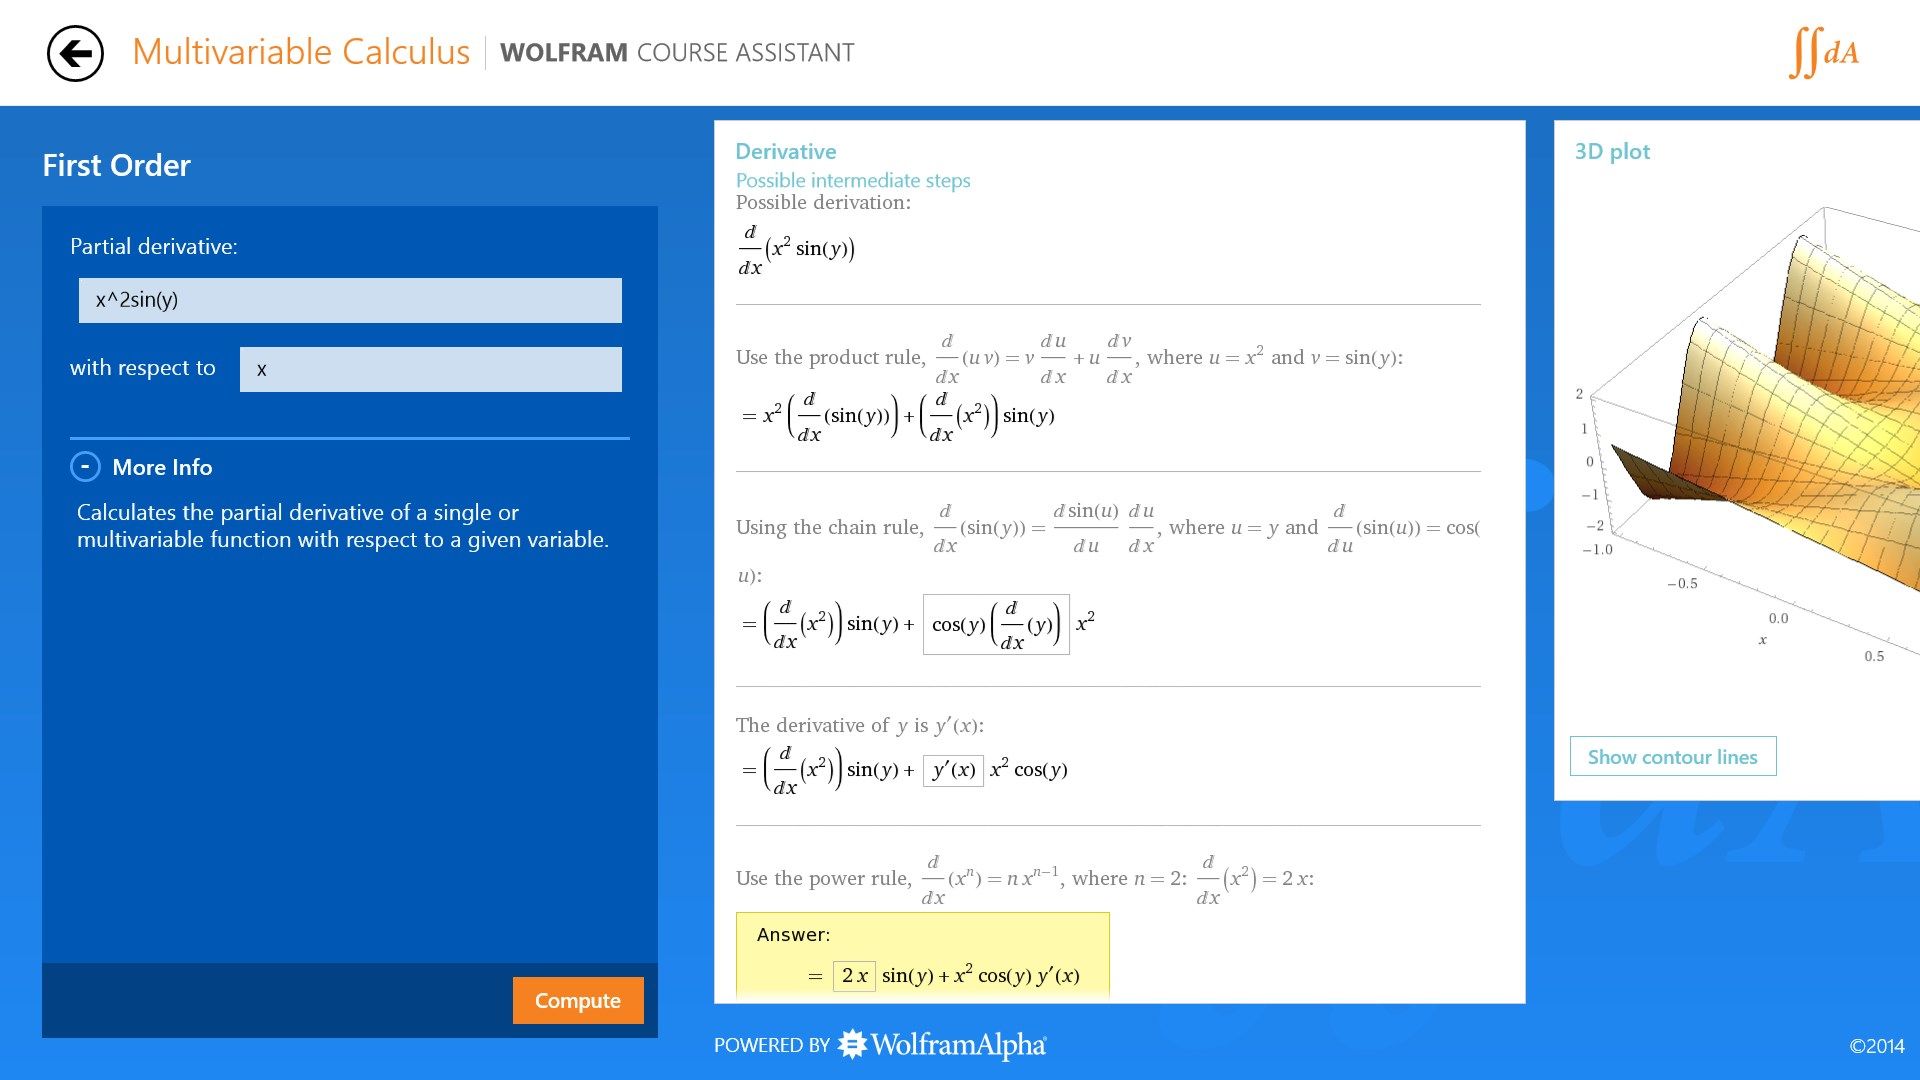 Follow the step-by-step solution to see answers to specific functions.